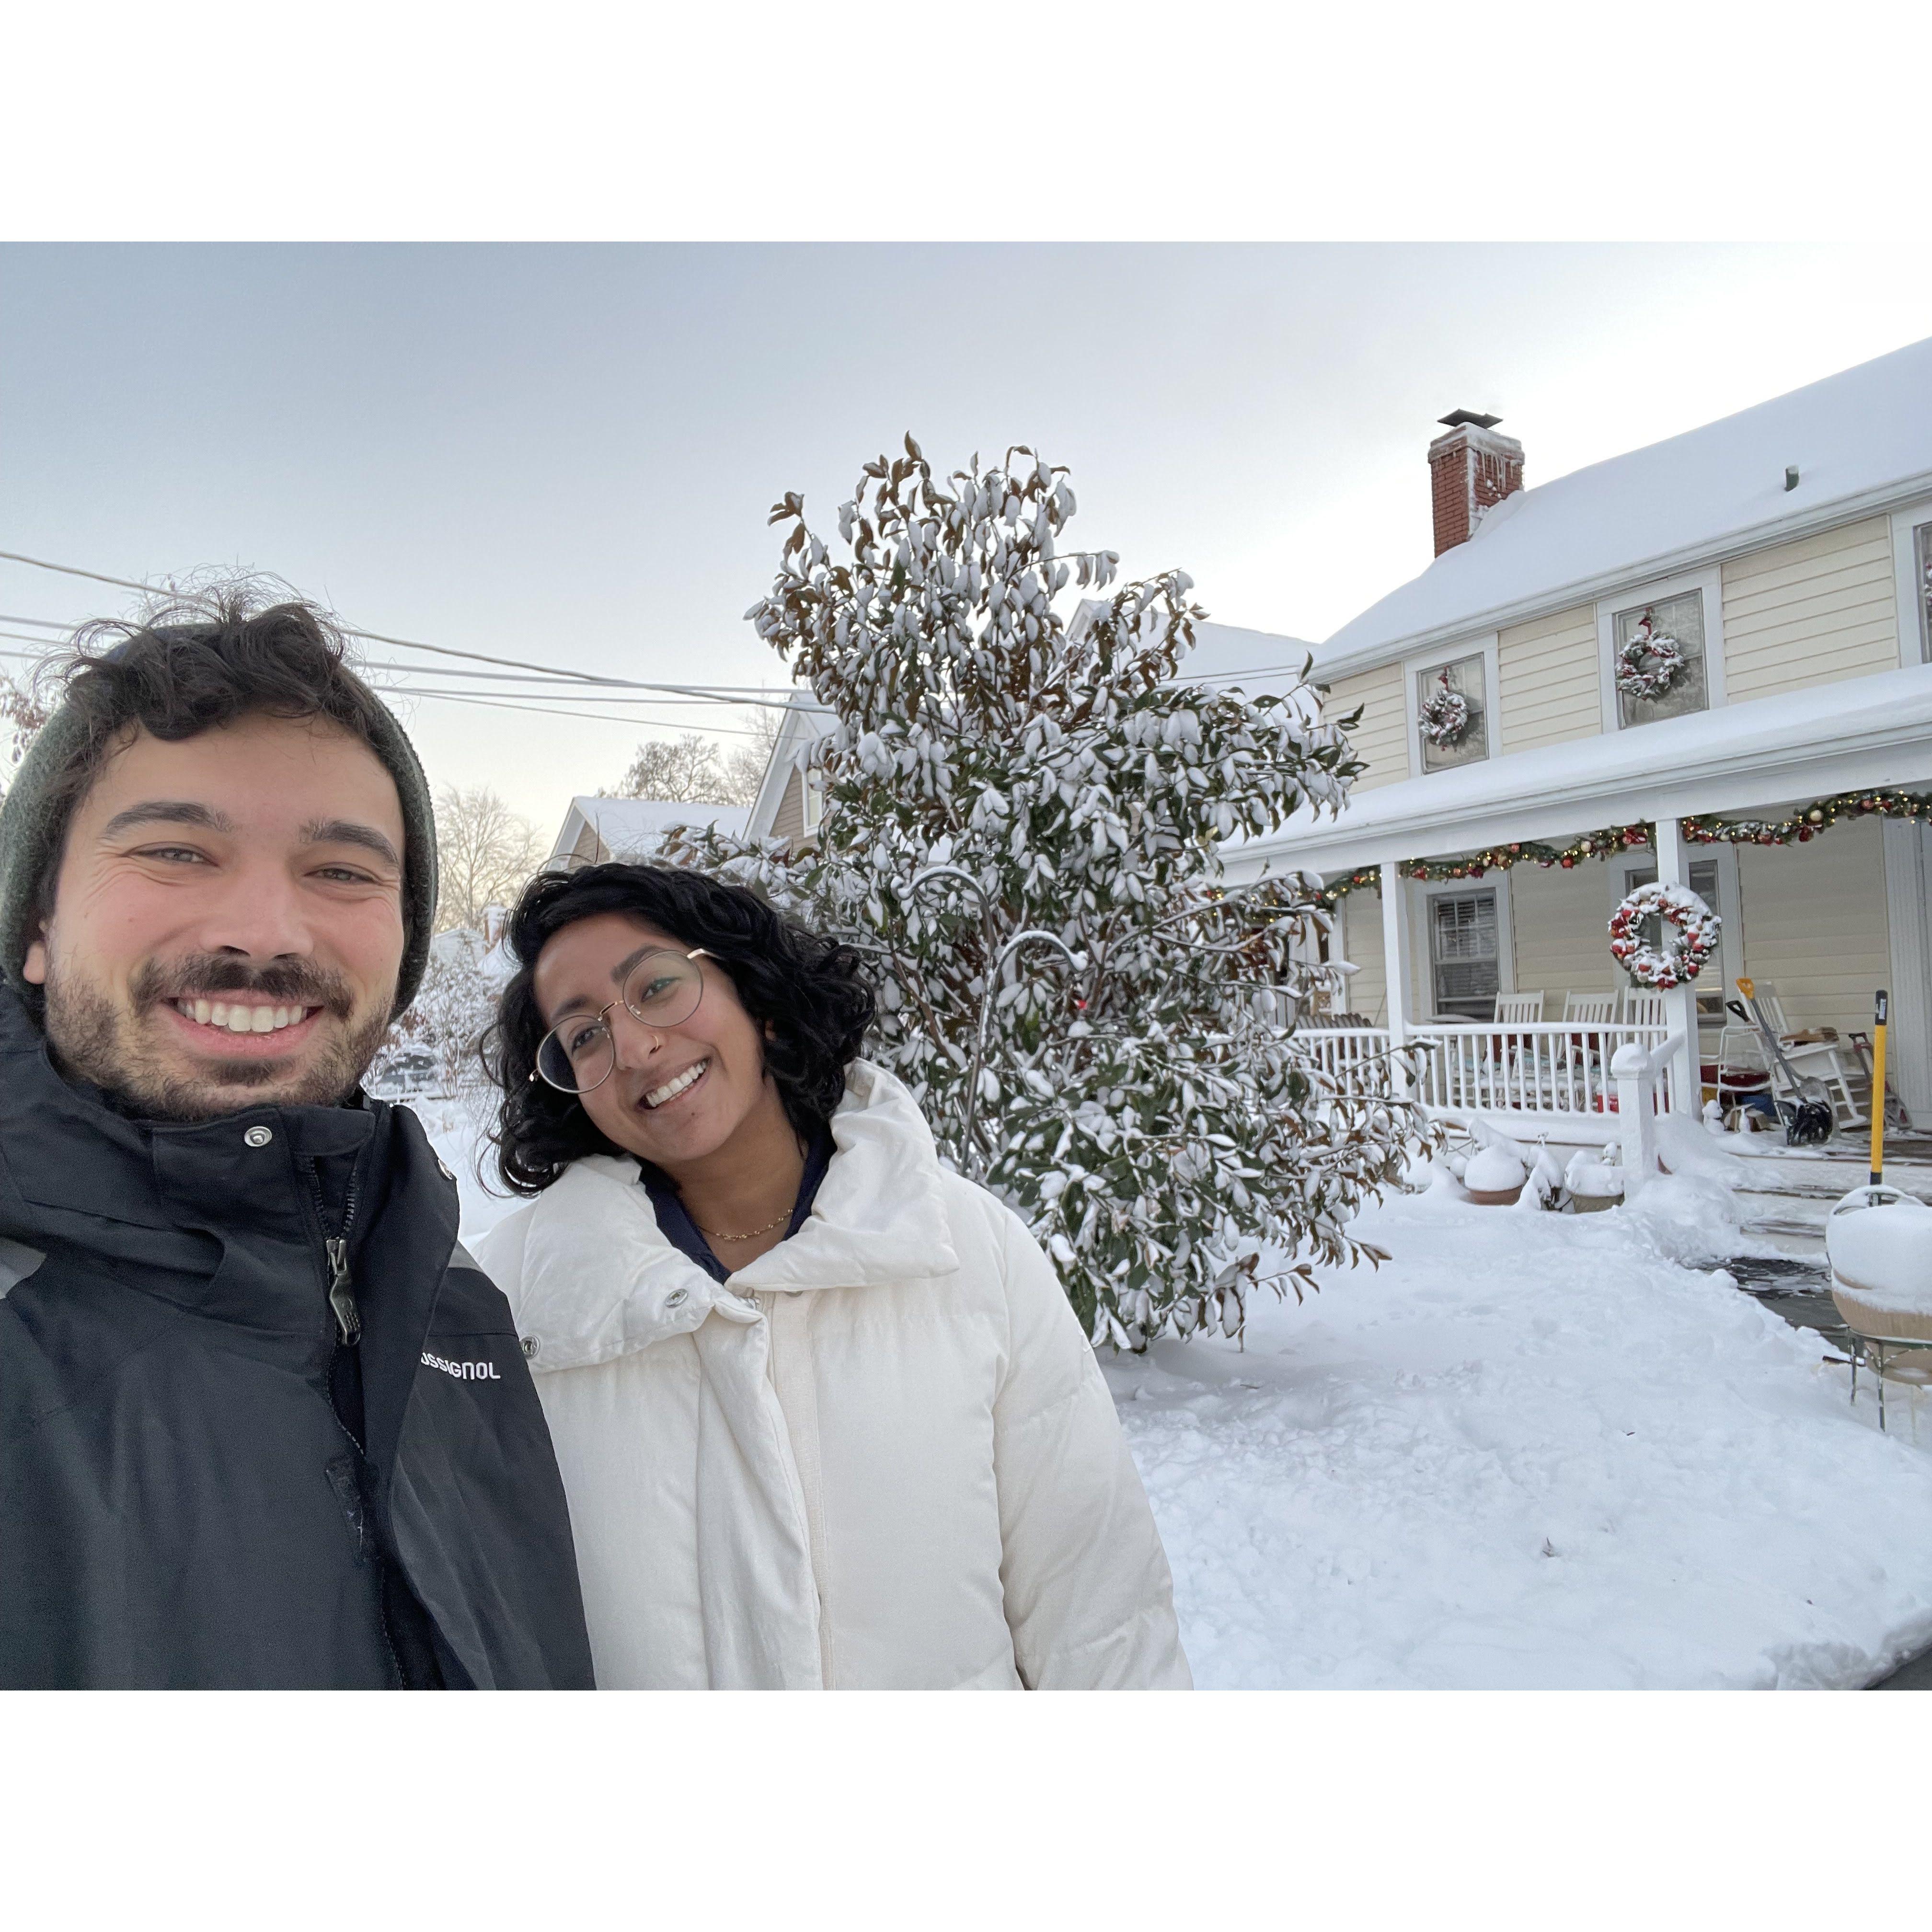 Our first snow together, from one of our many trips to see our families in the east coast.